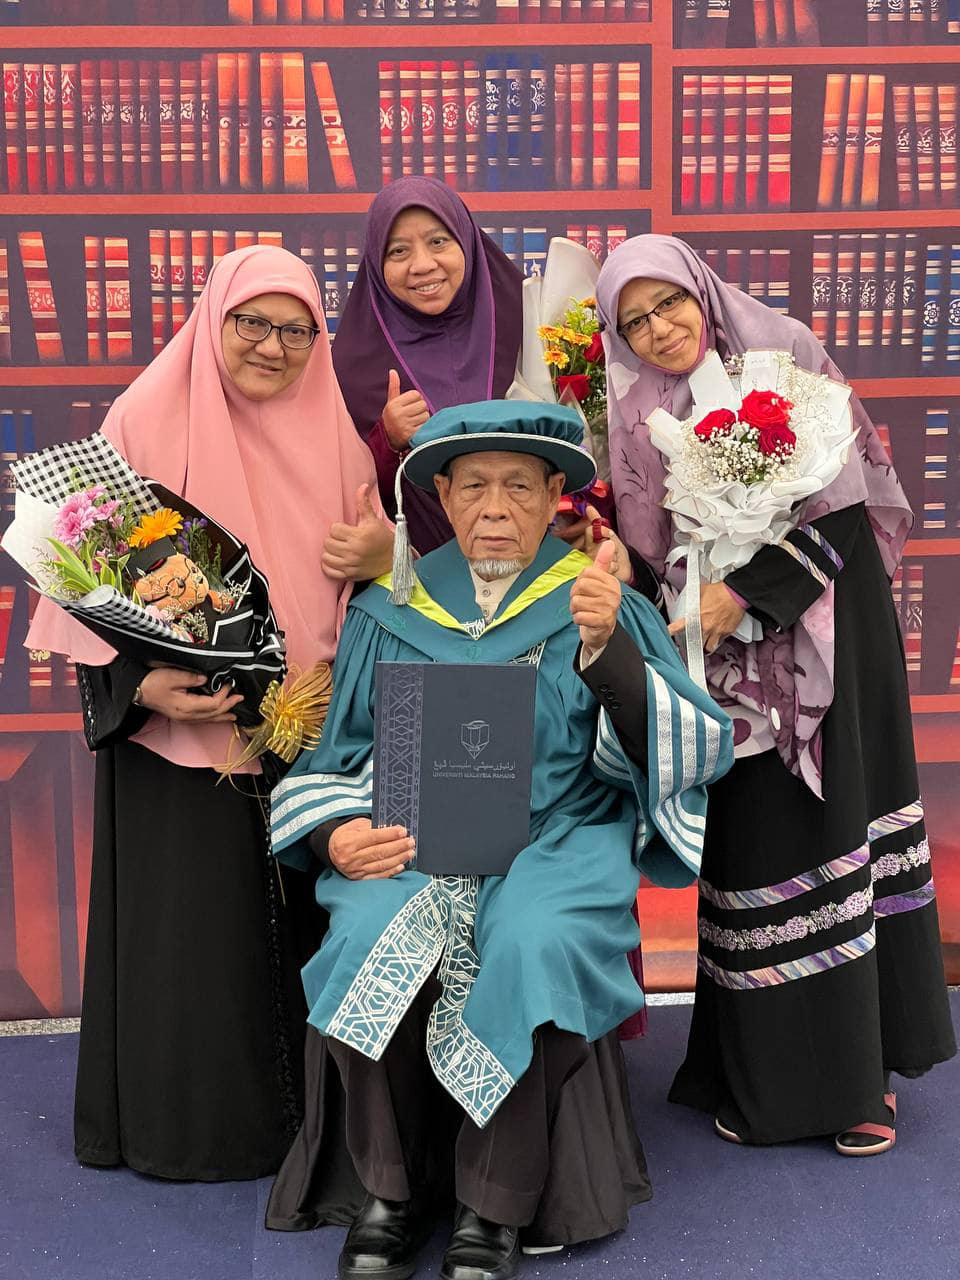 Age 83 is not a hindrance Dr. Jahid gets a second PhD